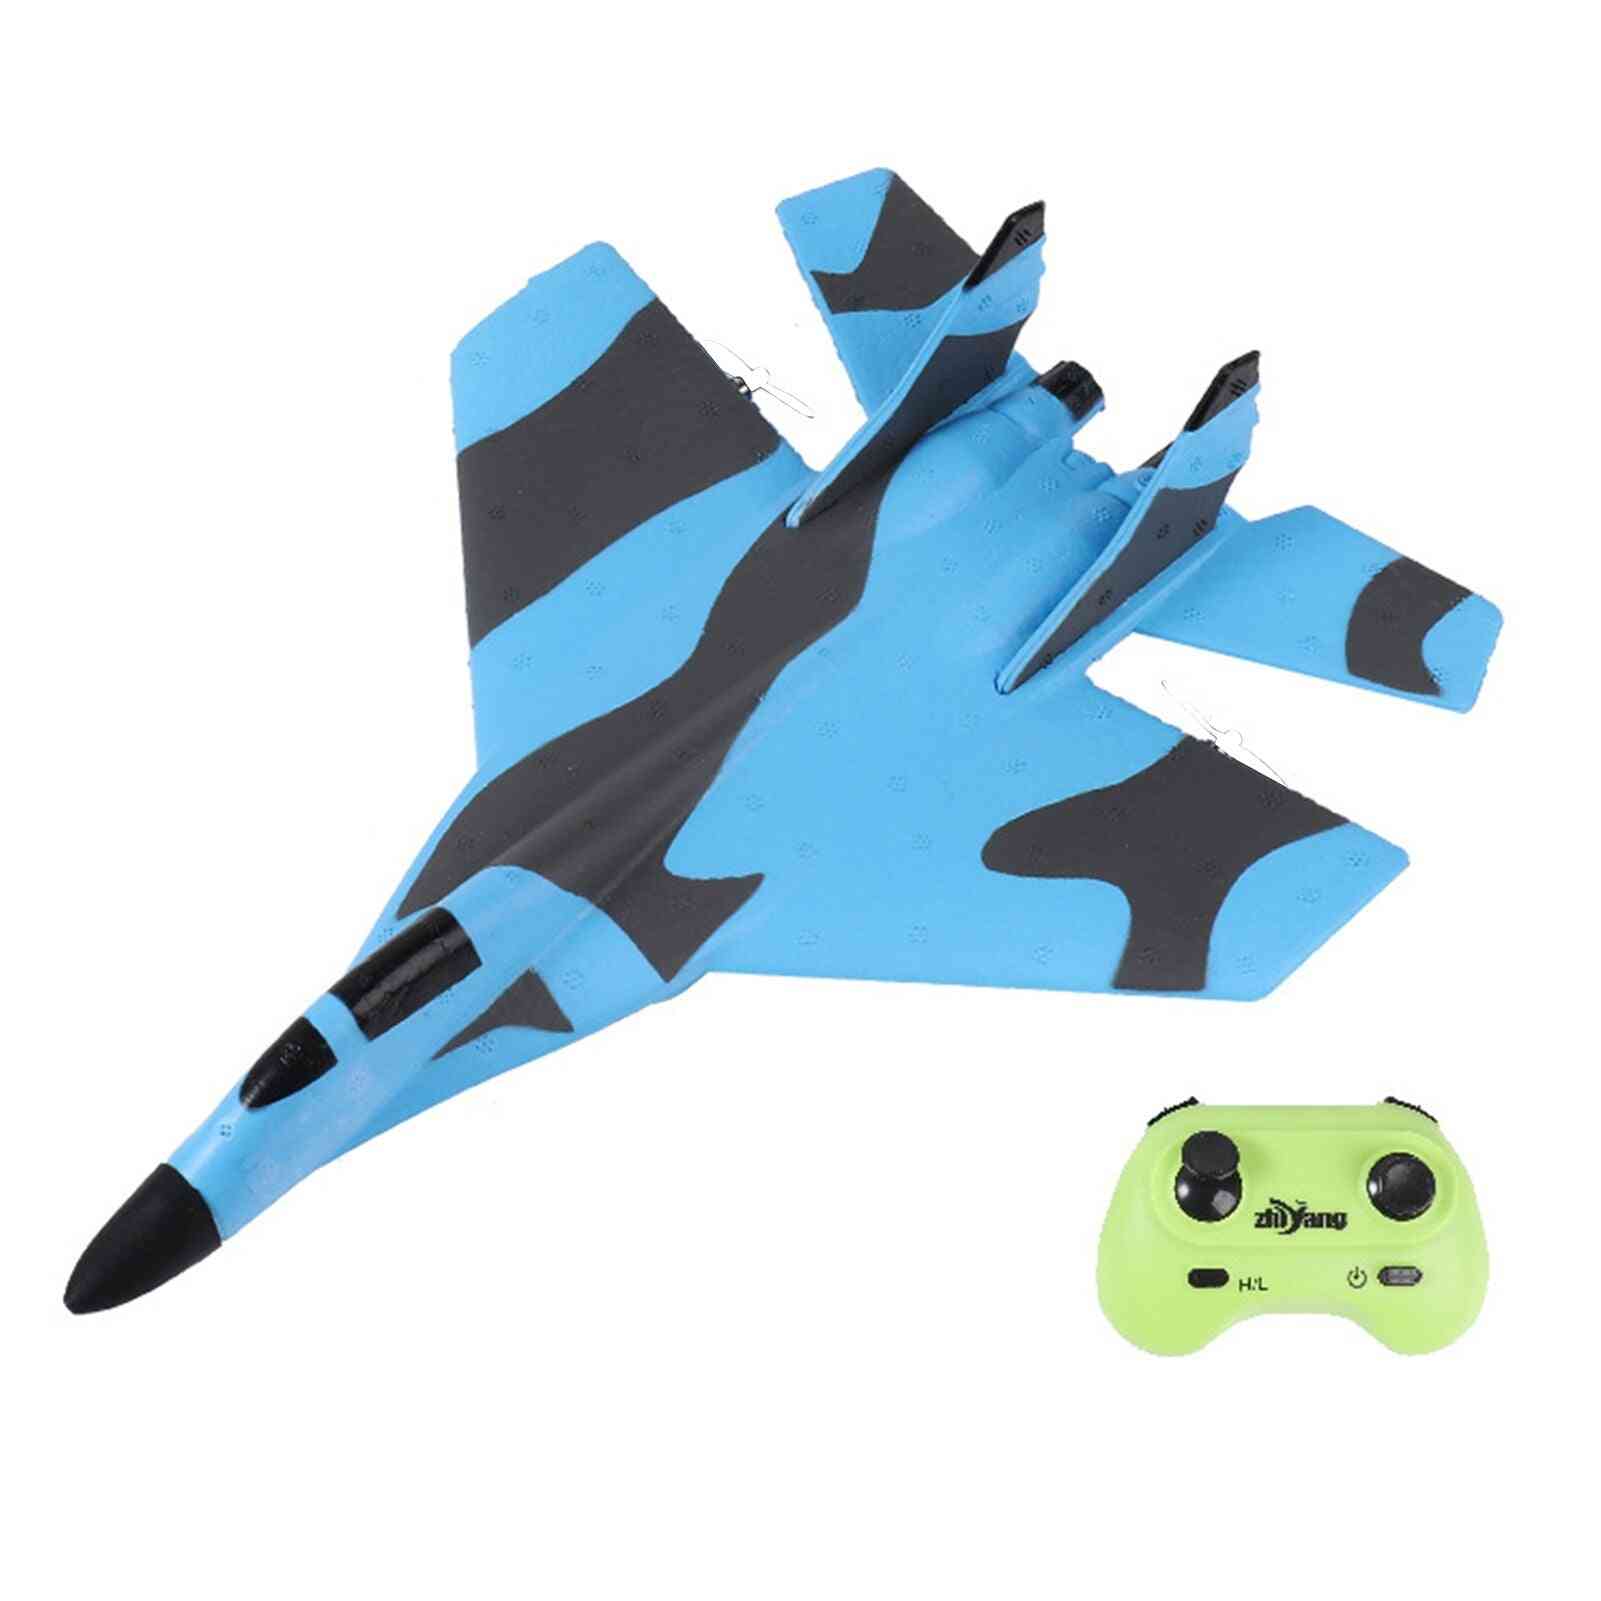 Rc Plane, Epp Foam Electric Radio Remote Control, Tail Pusher Quadcopter Glider Aircraft.